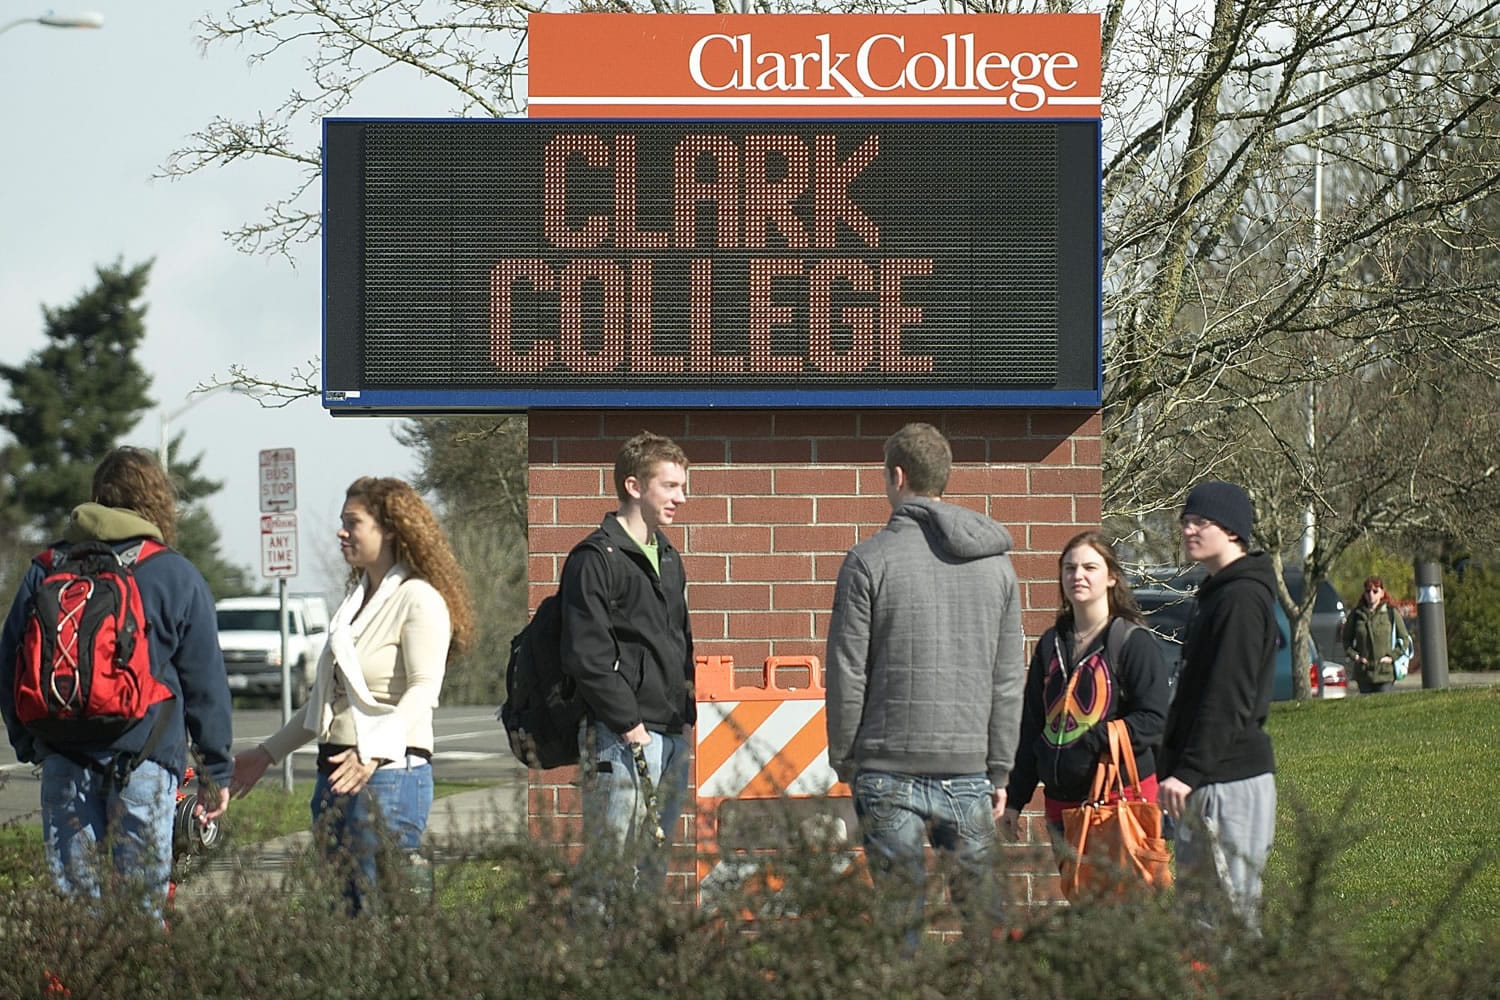 PeaceHealth has spelled out a detailed proposal to establish a 90-acre Clark College campus in Ridgefield.